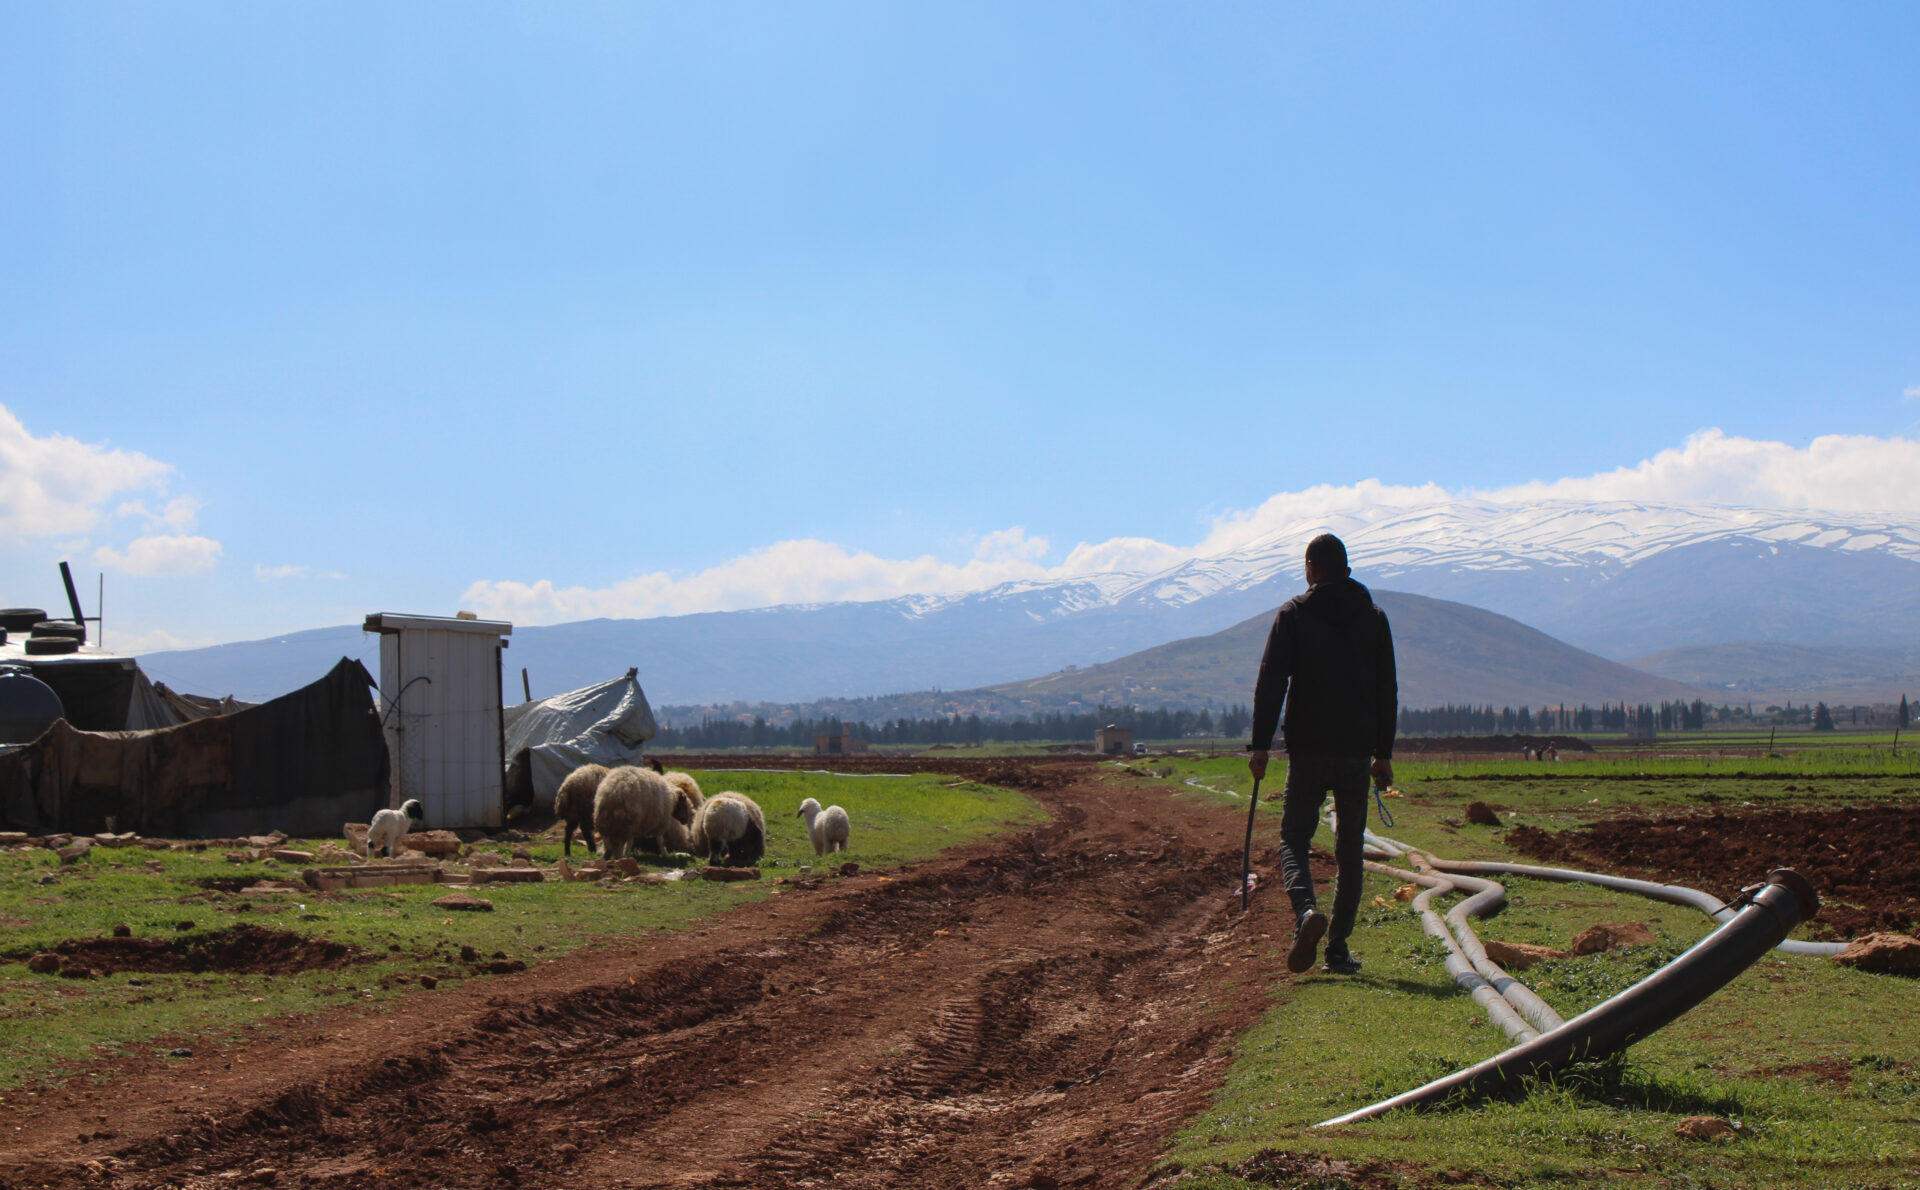 A young man herds sheep nearby a Syrian camp in Lebanon’s Bekaa Valley (Hanna Davis)